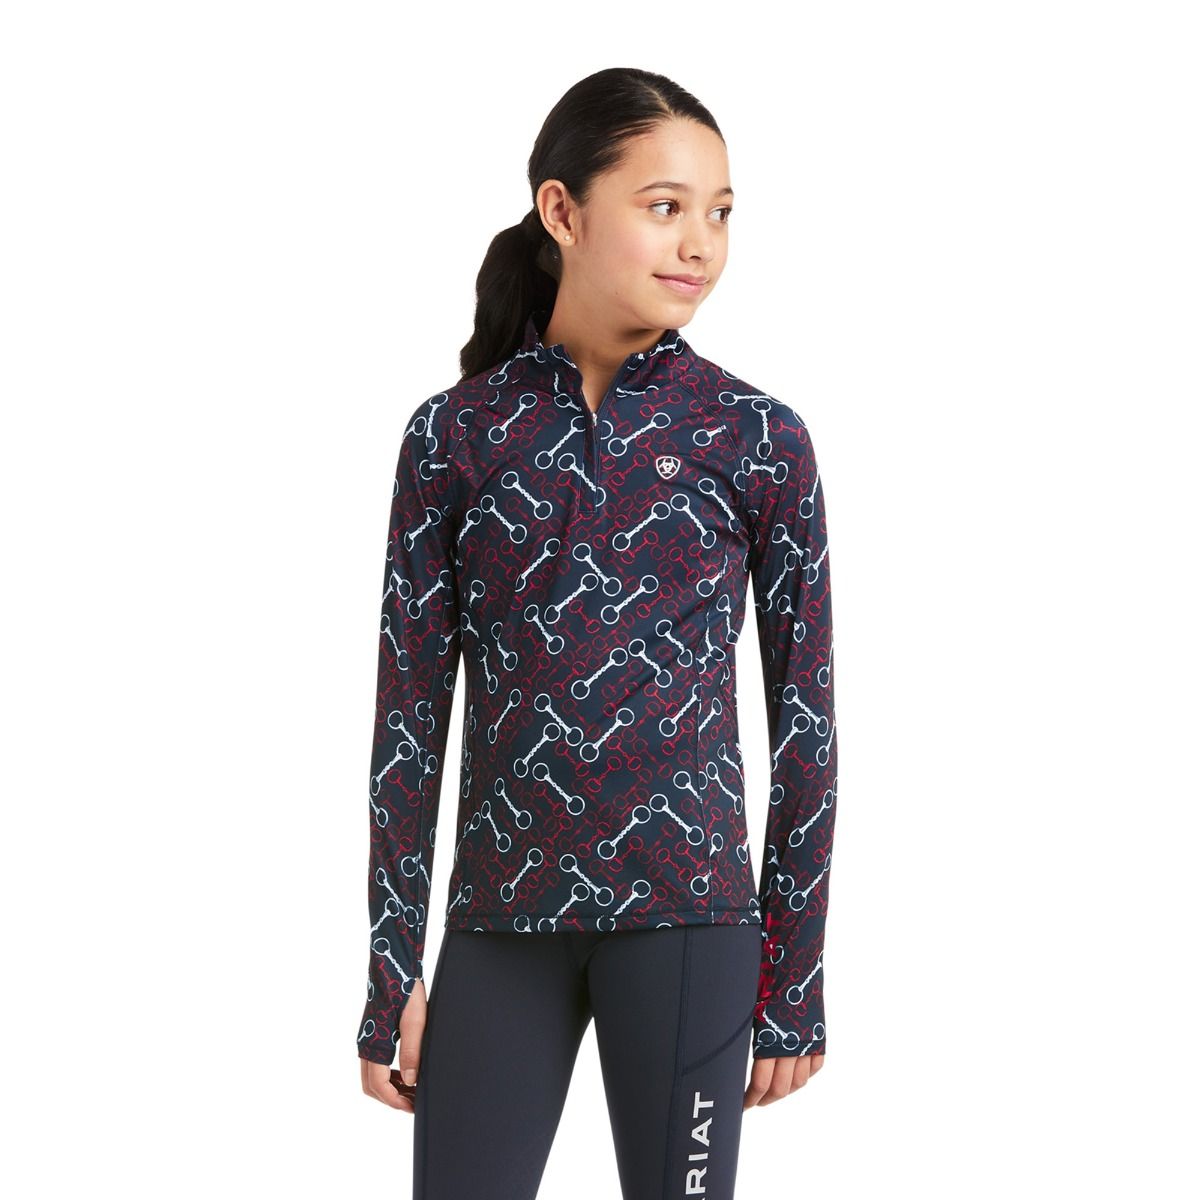 Ariat Youth Lowell 2.0 1/4 Zip Team Print 